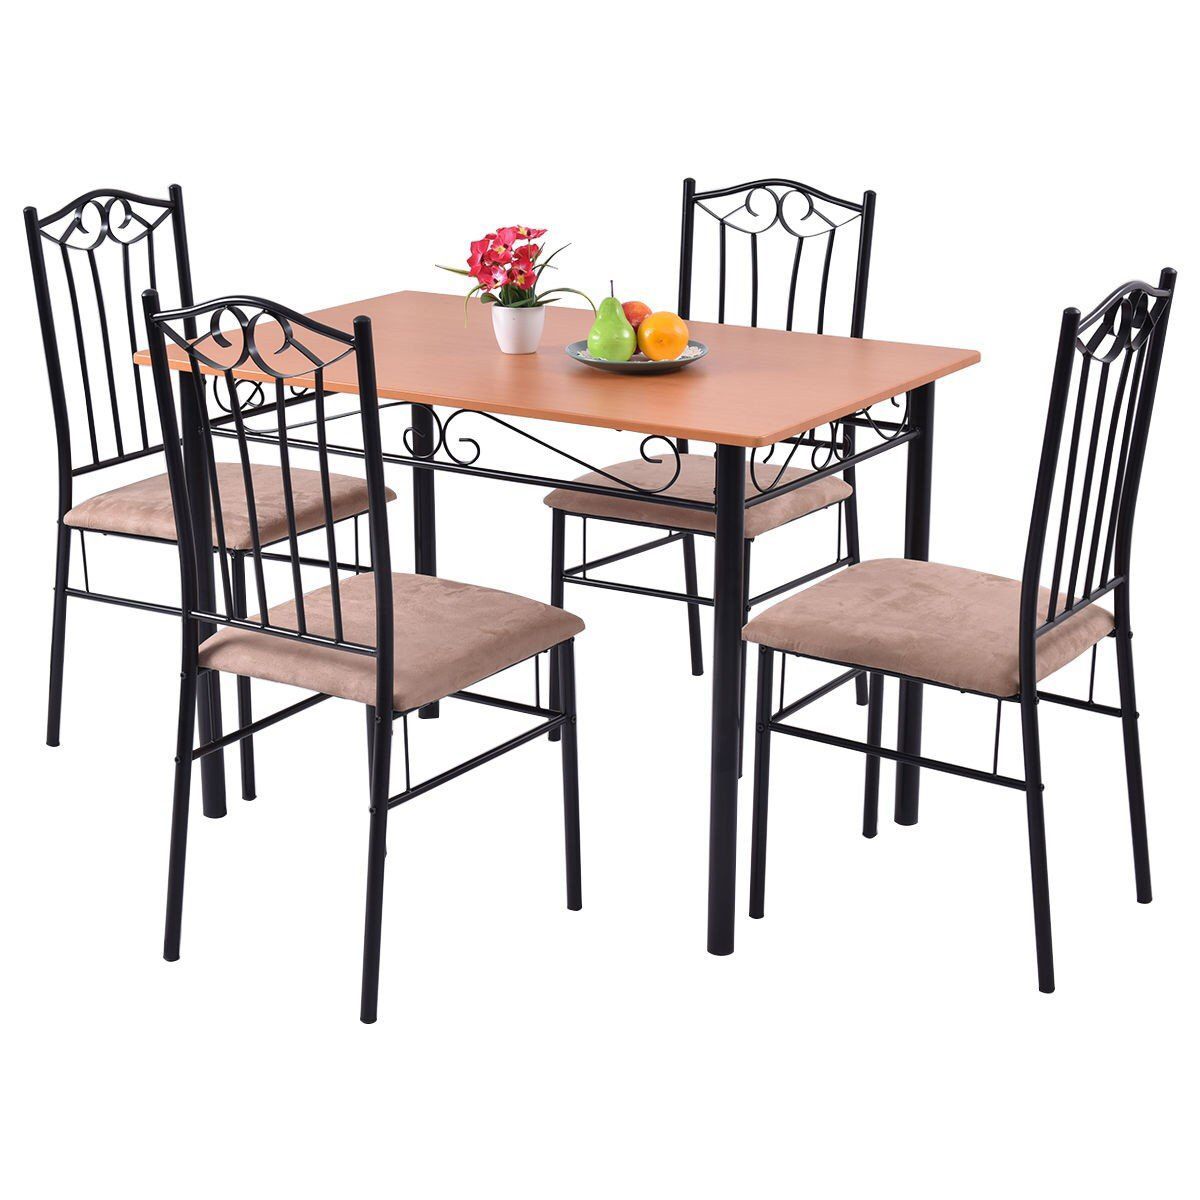 Mainstay 5 Piece Wooden Dining Set In 2019 | Simple Modern Co Inside Most Current Conover 5 Piece Dining Sets (View 12 of 20)